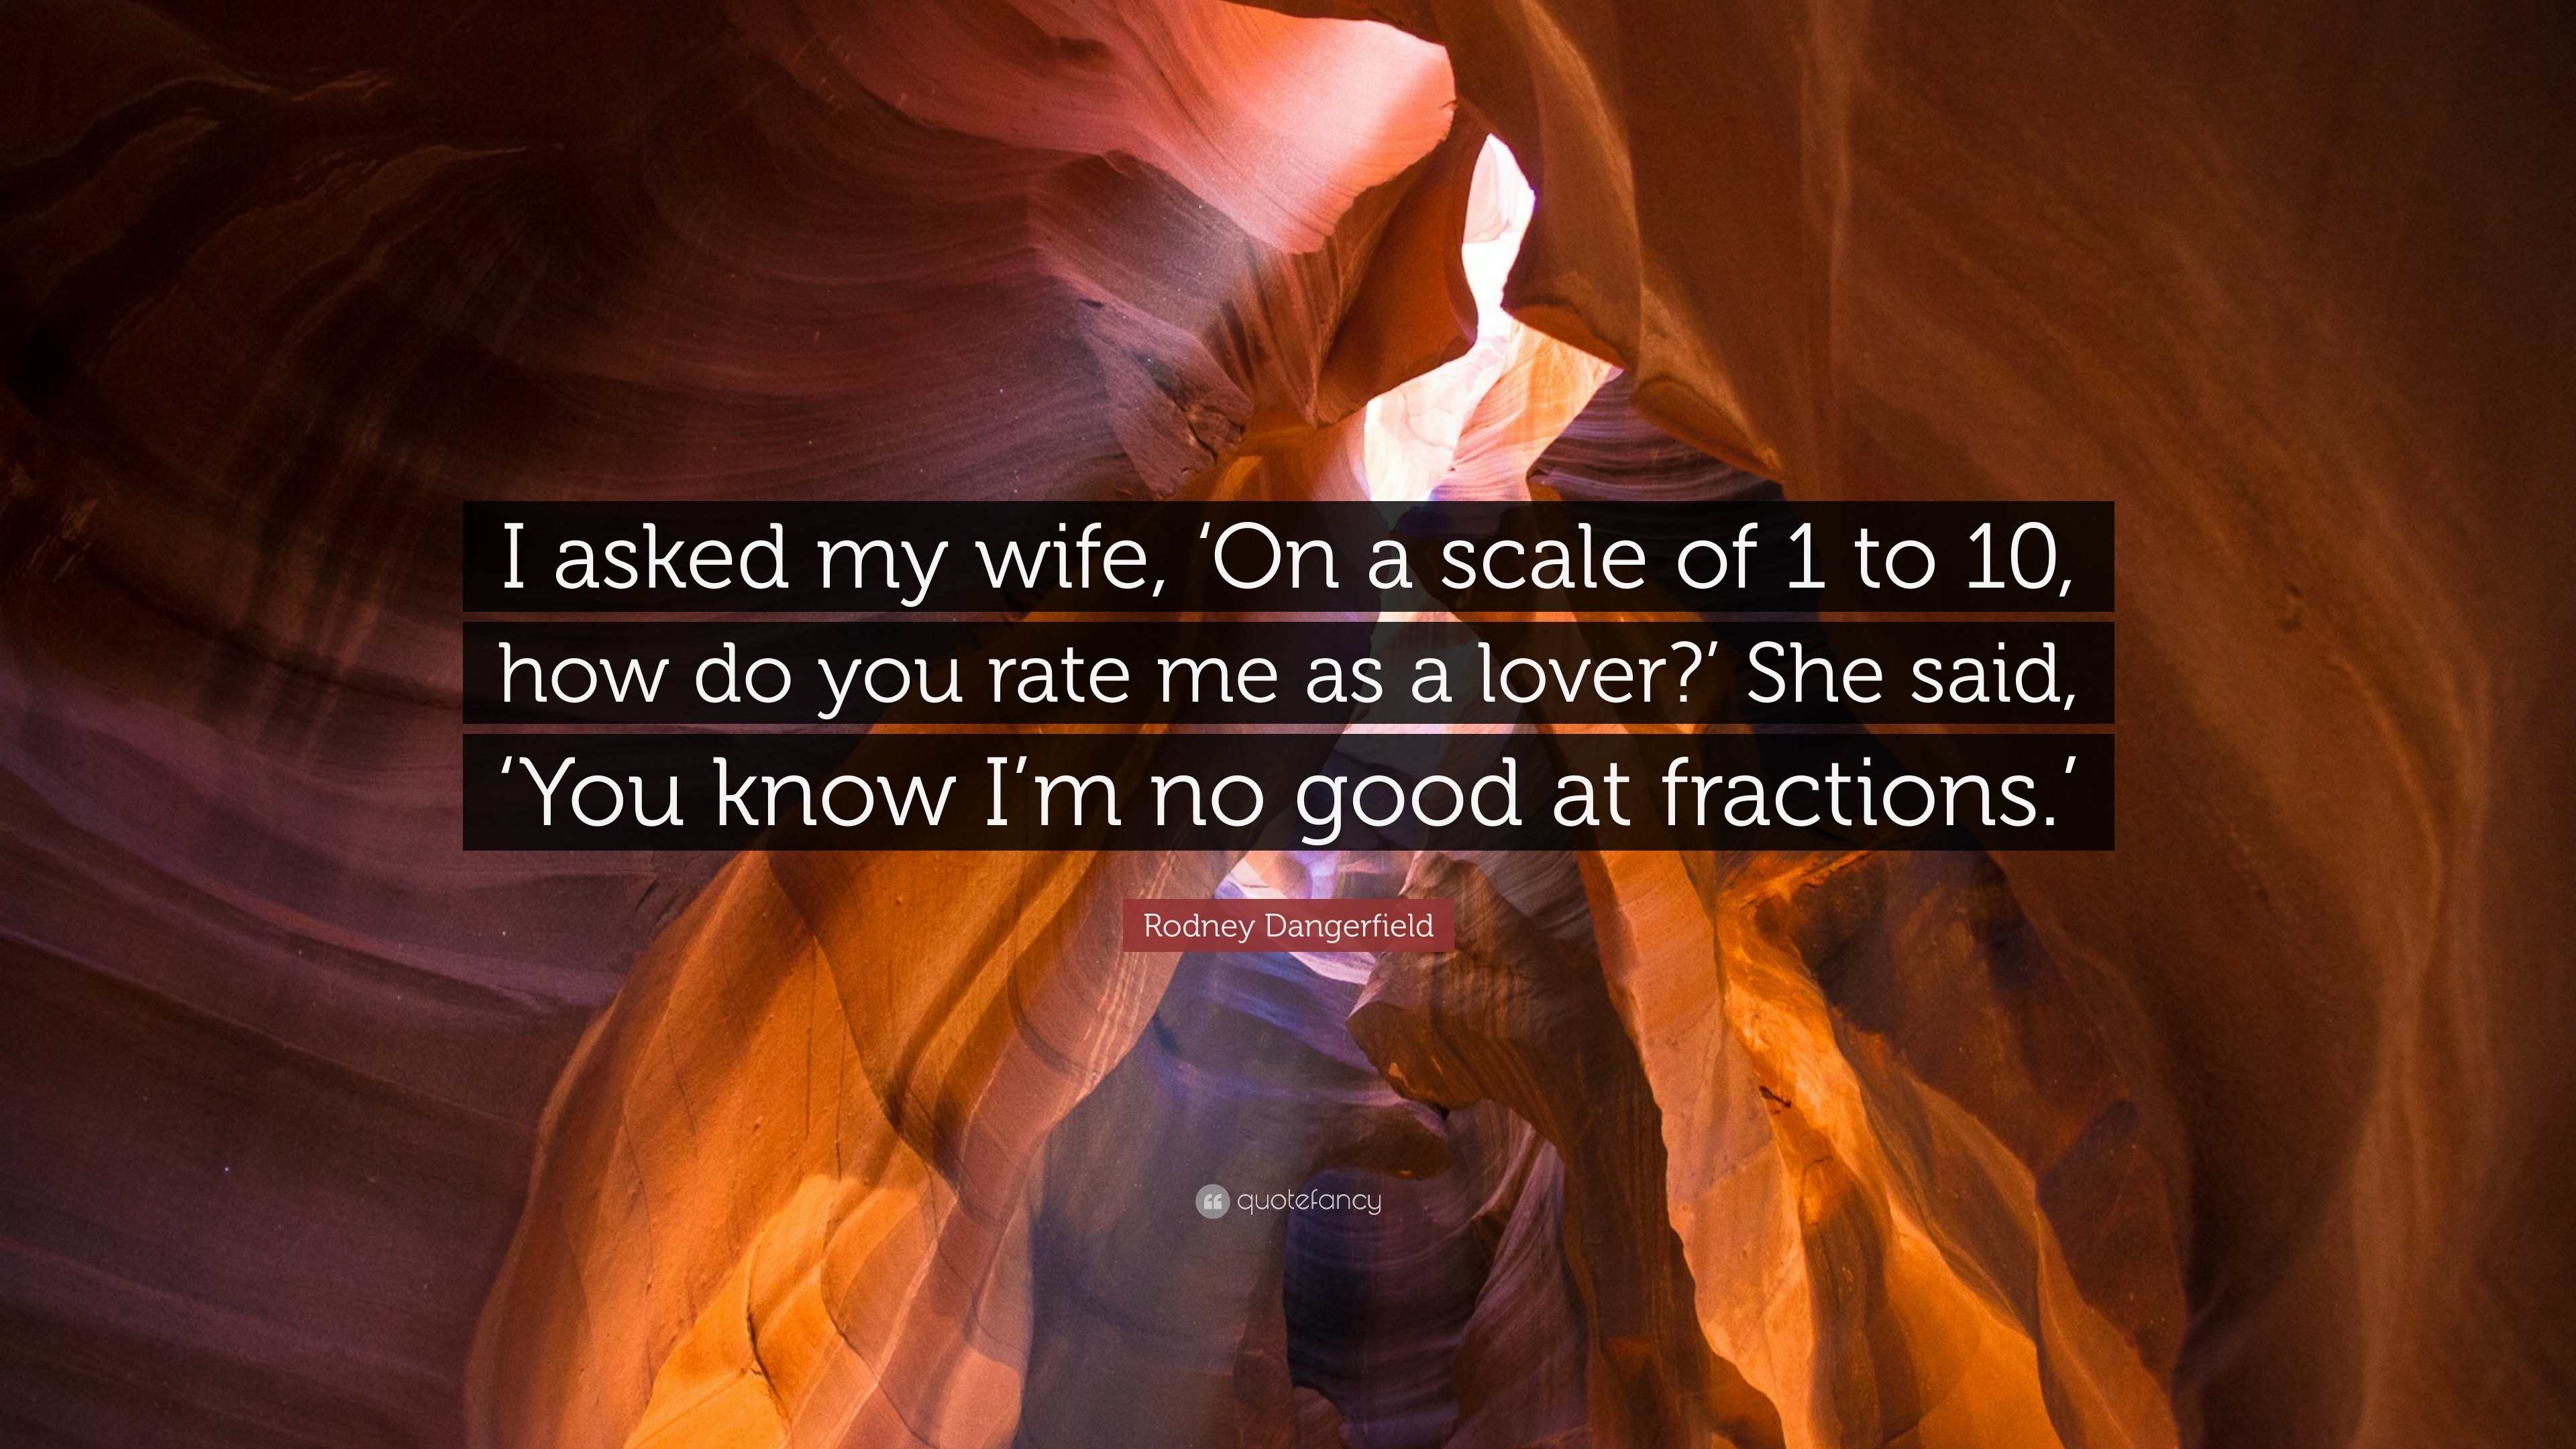 bryce osmond recommends Rate Wife Pics